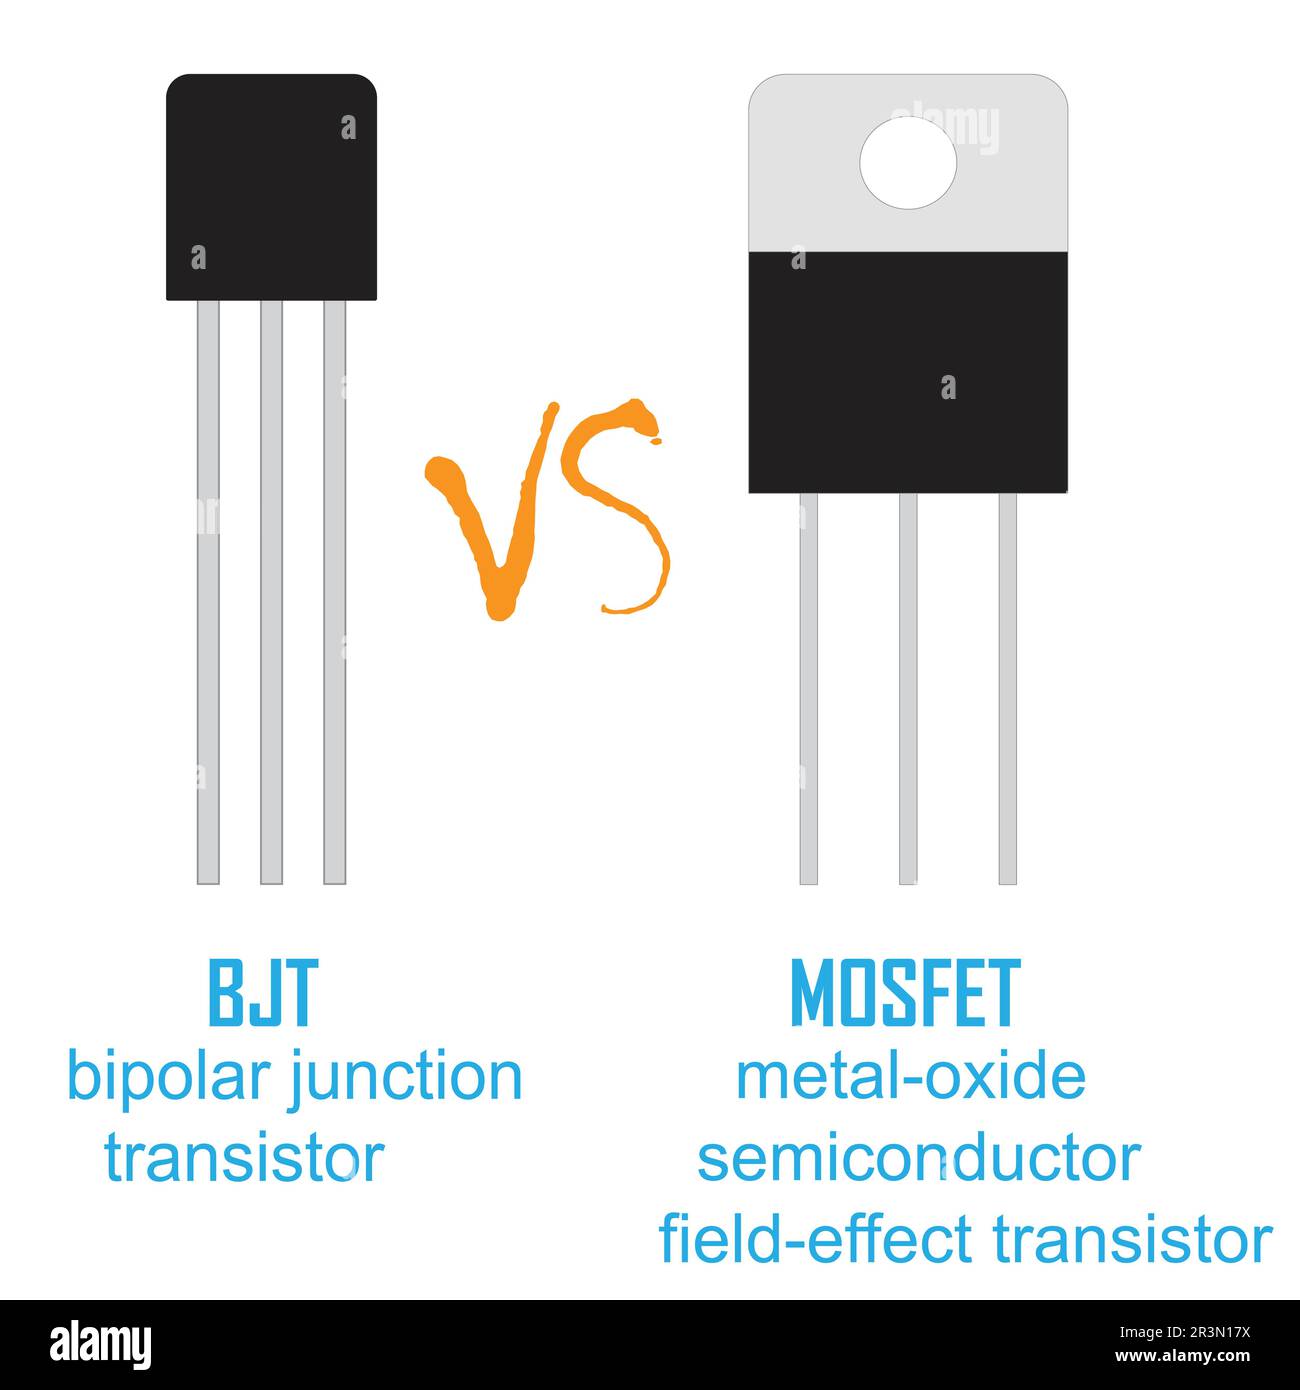 https://c8.alamy.com/comp/2R3N17X/bjt-and-mosfet-transistor-on-one-frame-vector-design-2R3N17X.jpg